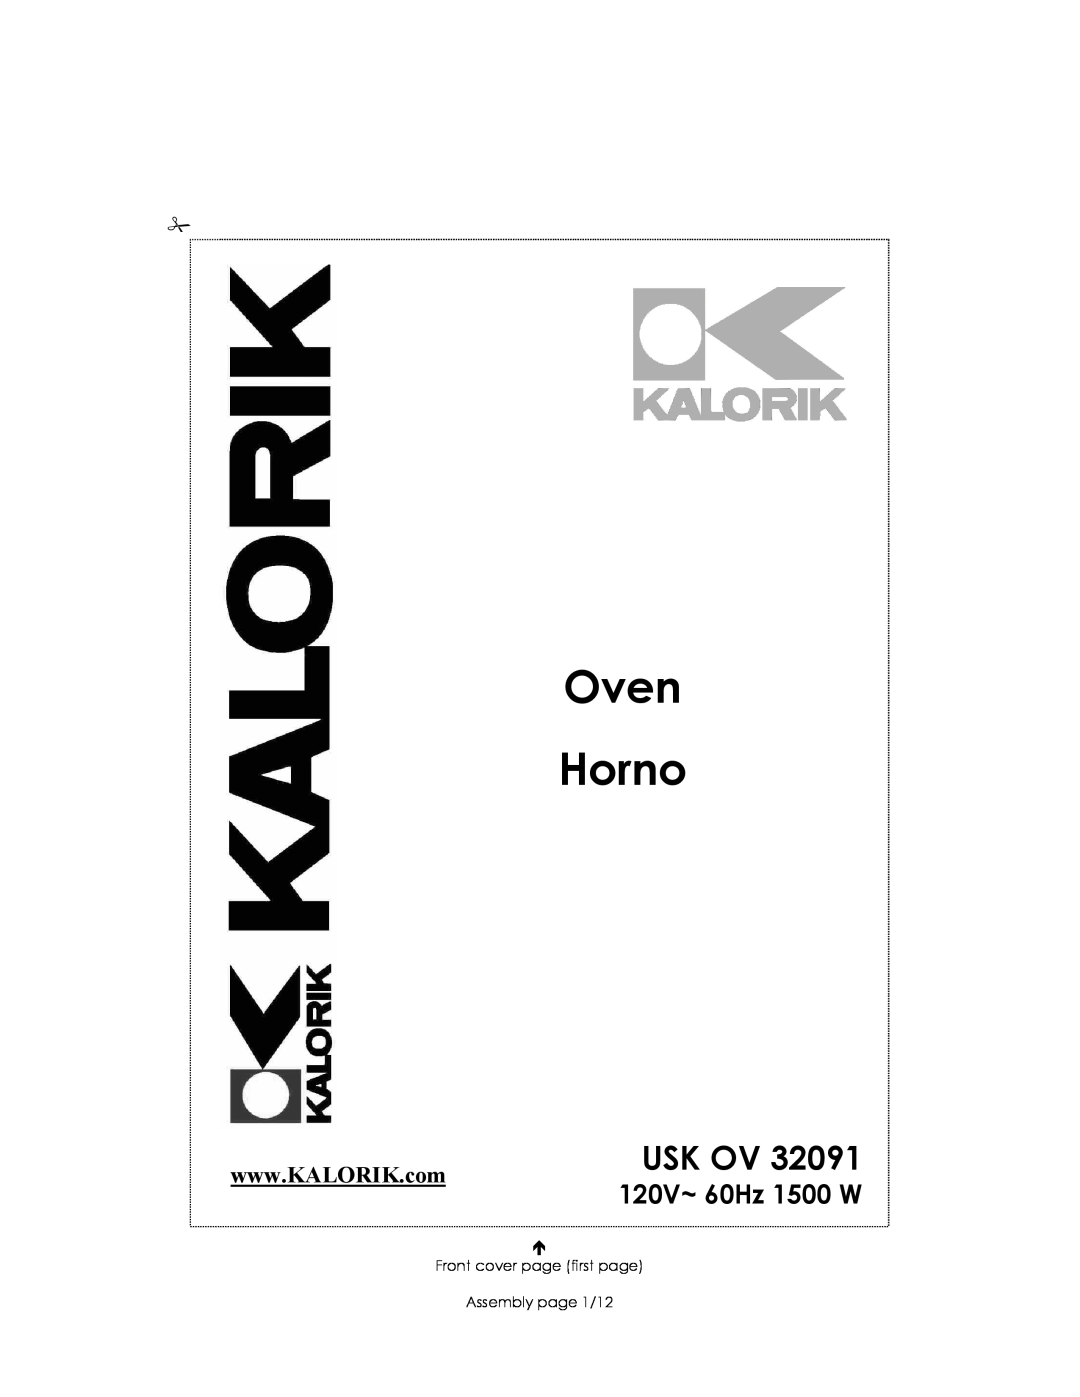 Kalorik USK OV 32091 manual Usk Ov, 120V~ 60Hz 1500 W, Oven Horno, Front cover page first page Assembly page 1/24 